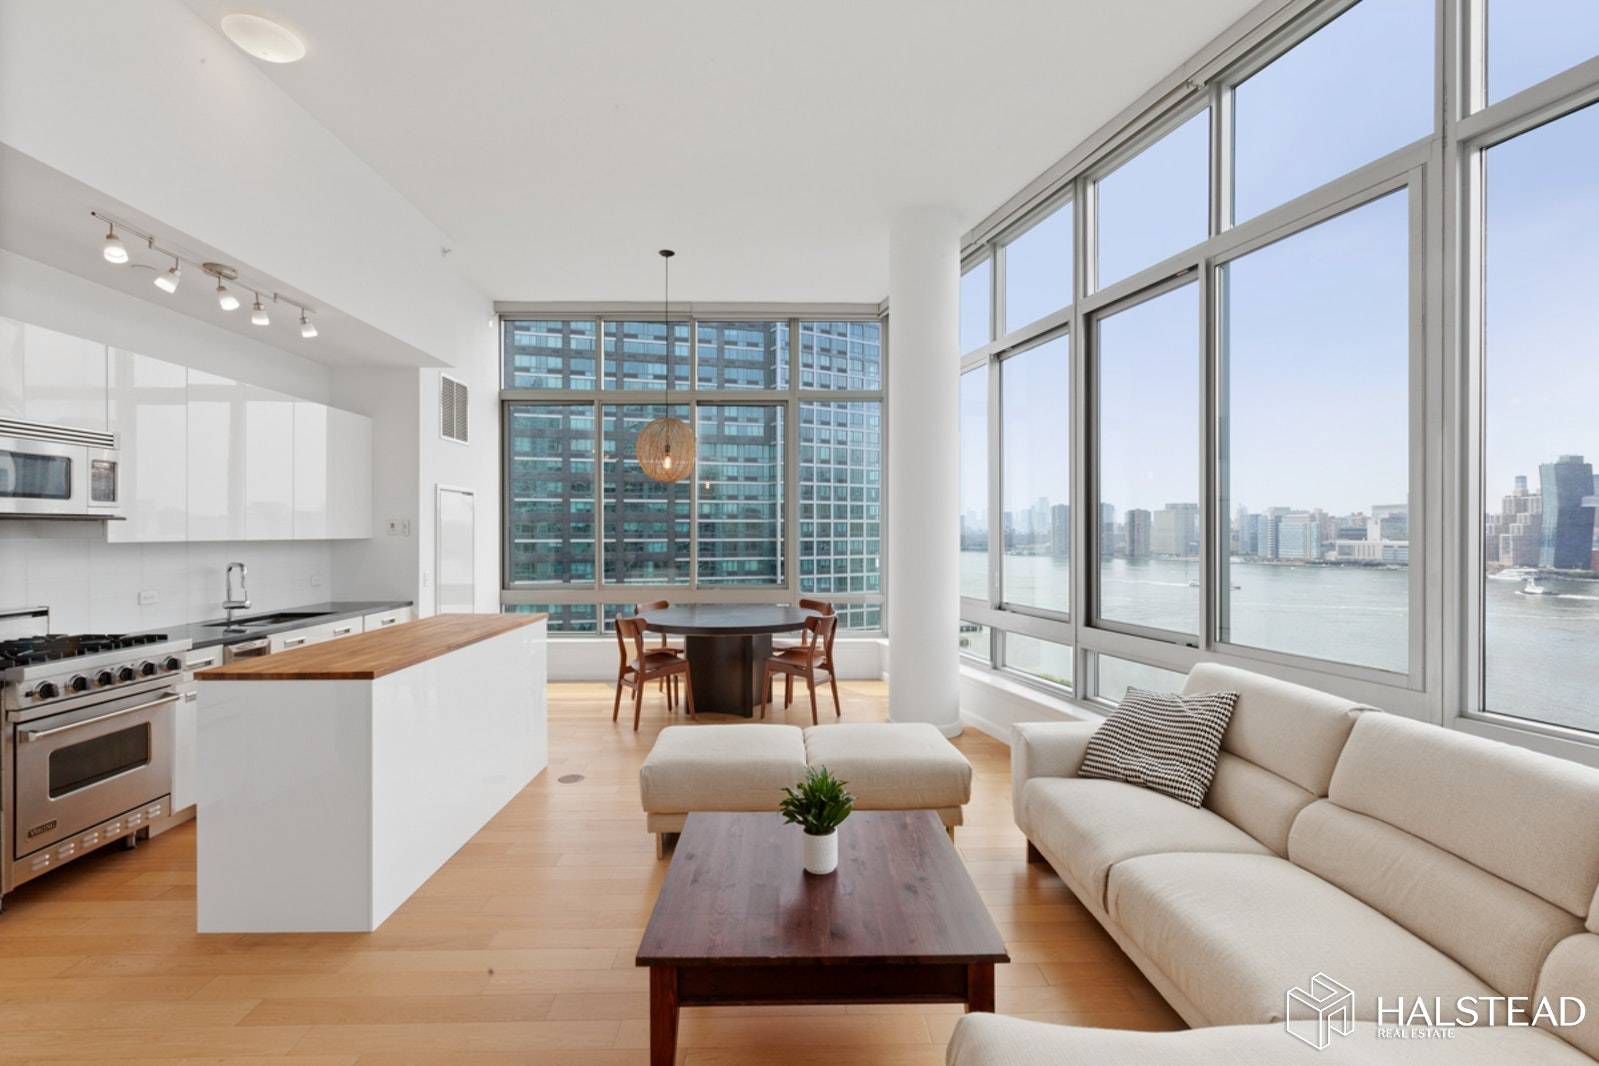 Come home to one of the most beautiful apartments in Long Island City with some of the most stunning views in all of NYC !